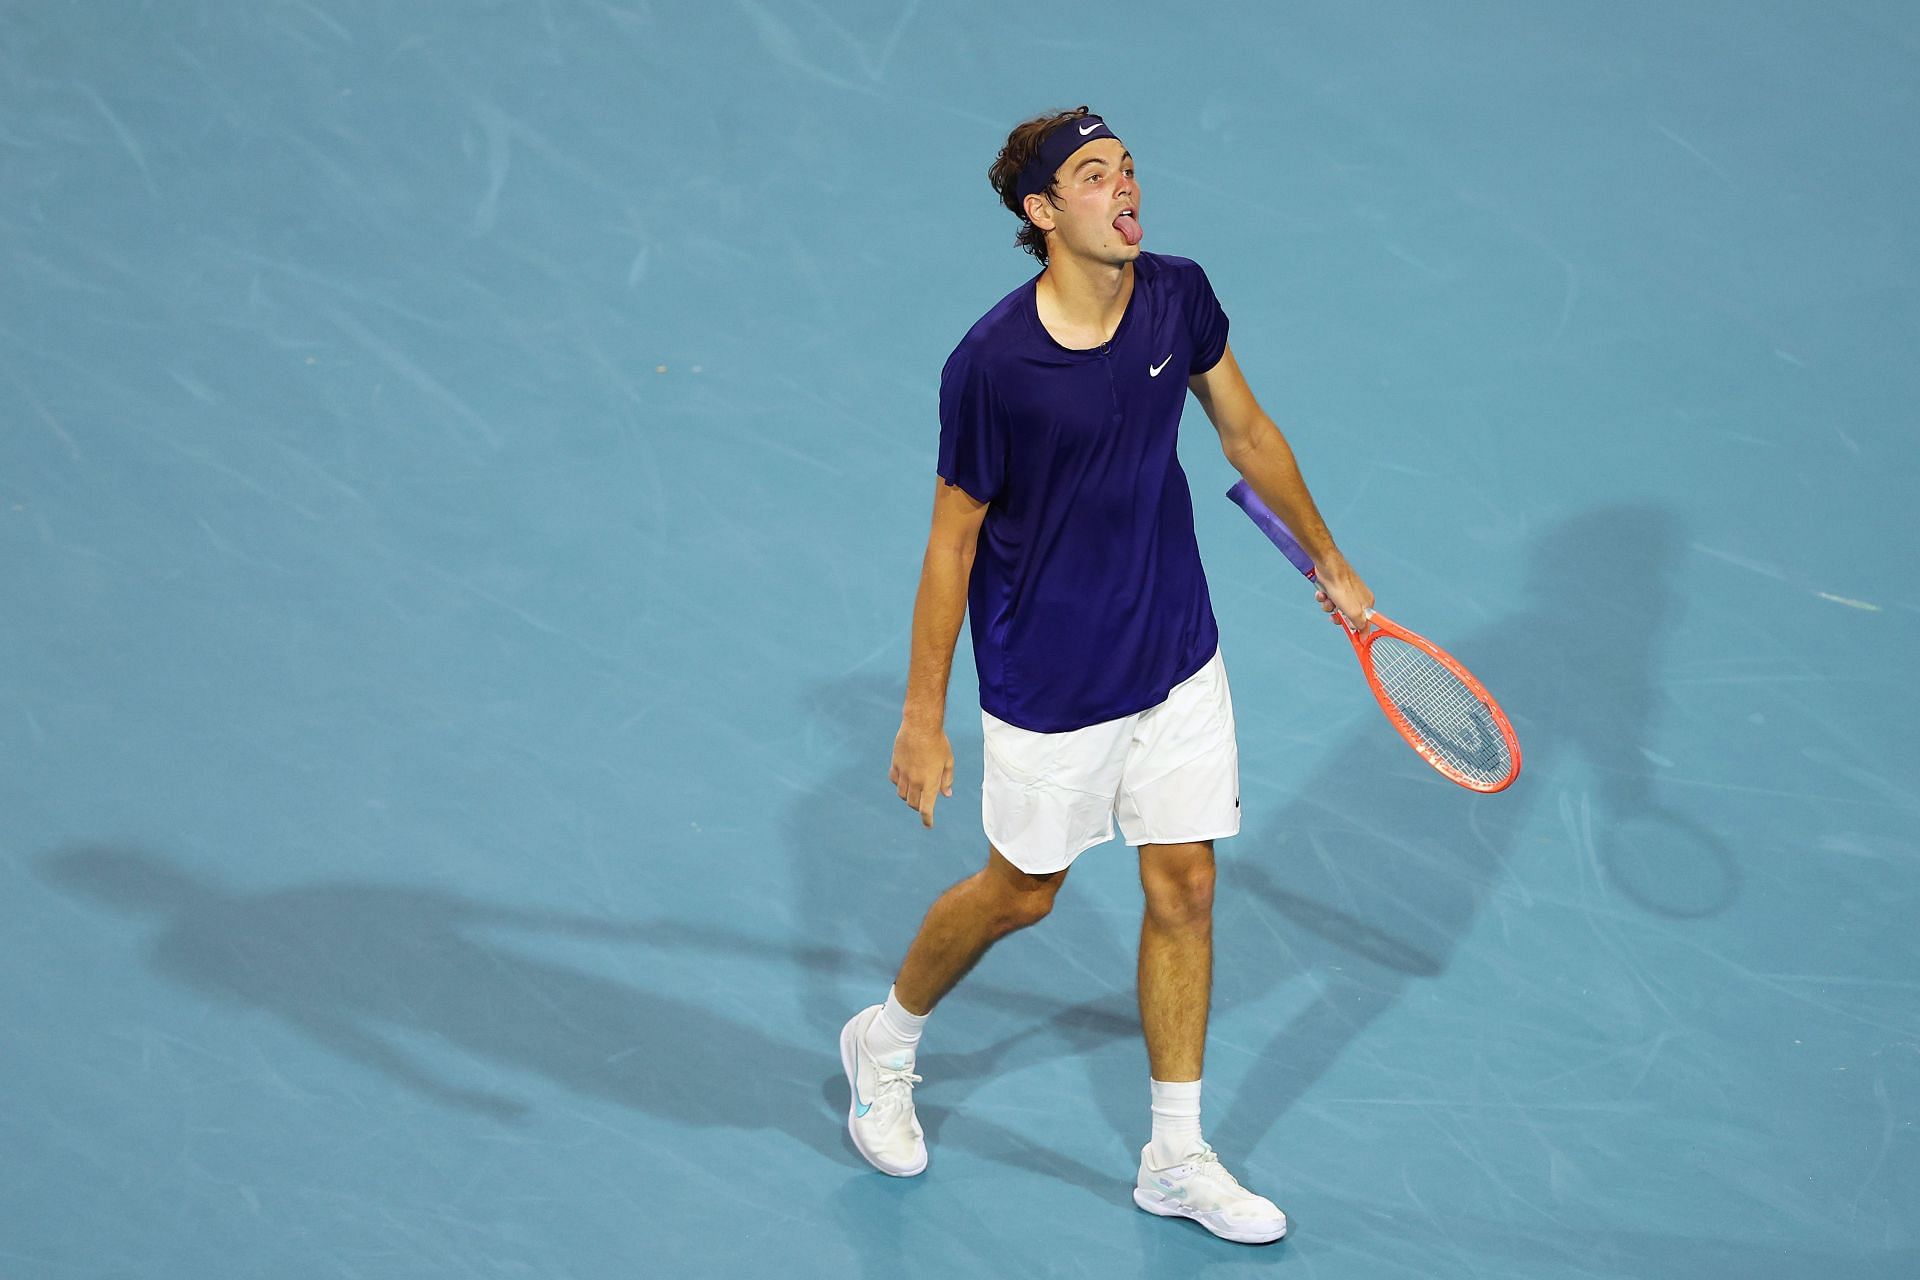 Taylor Fritz at the 2022 Miami Open - Day 9